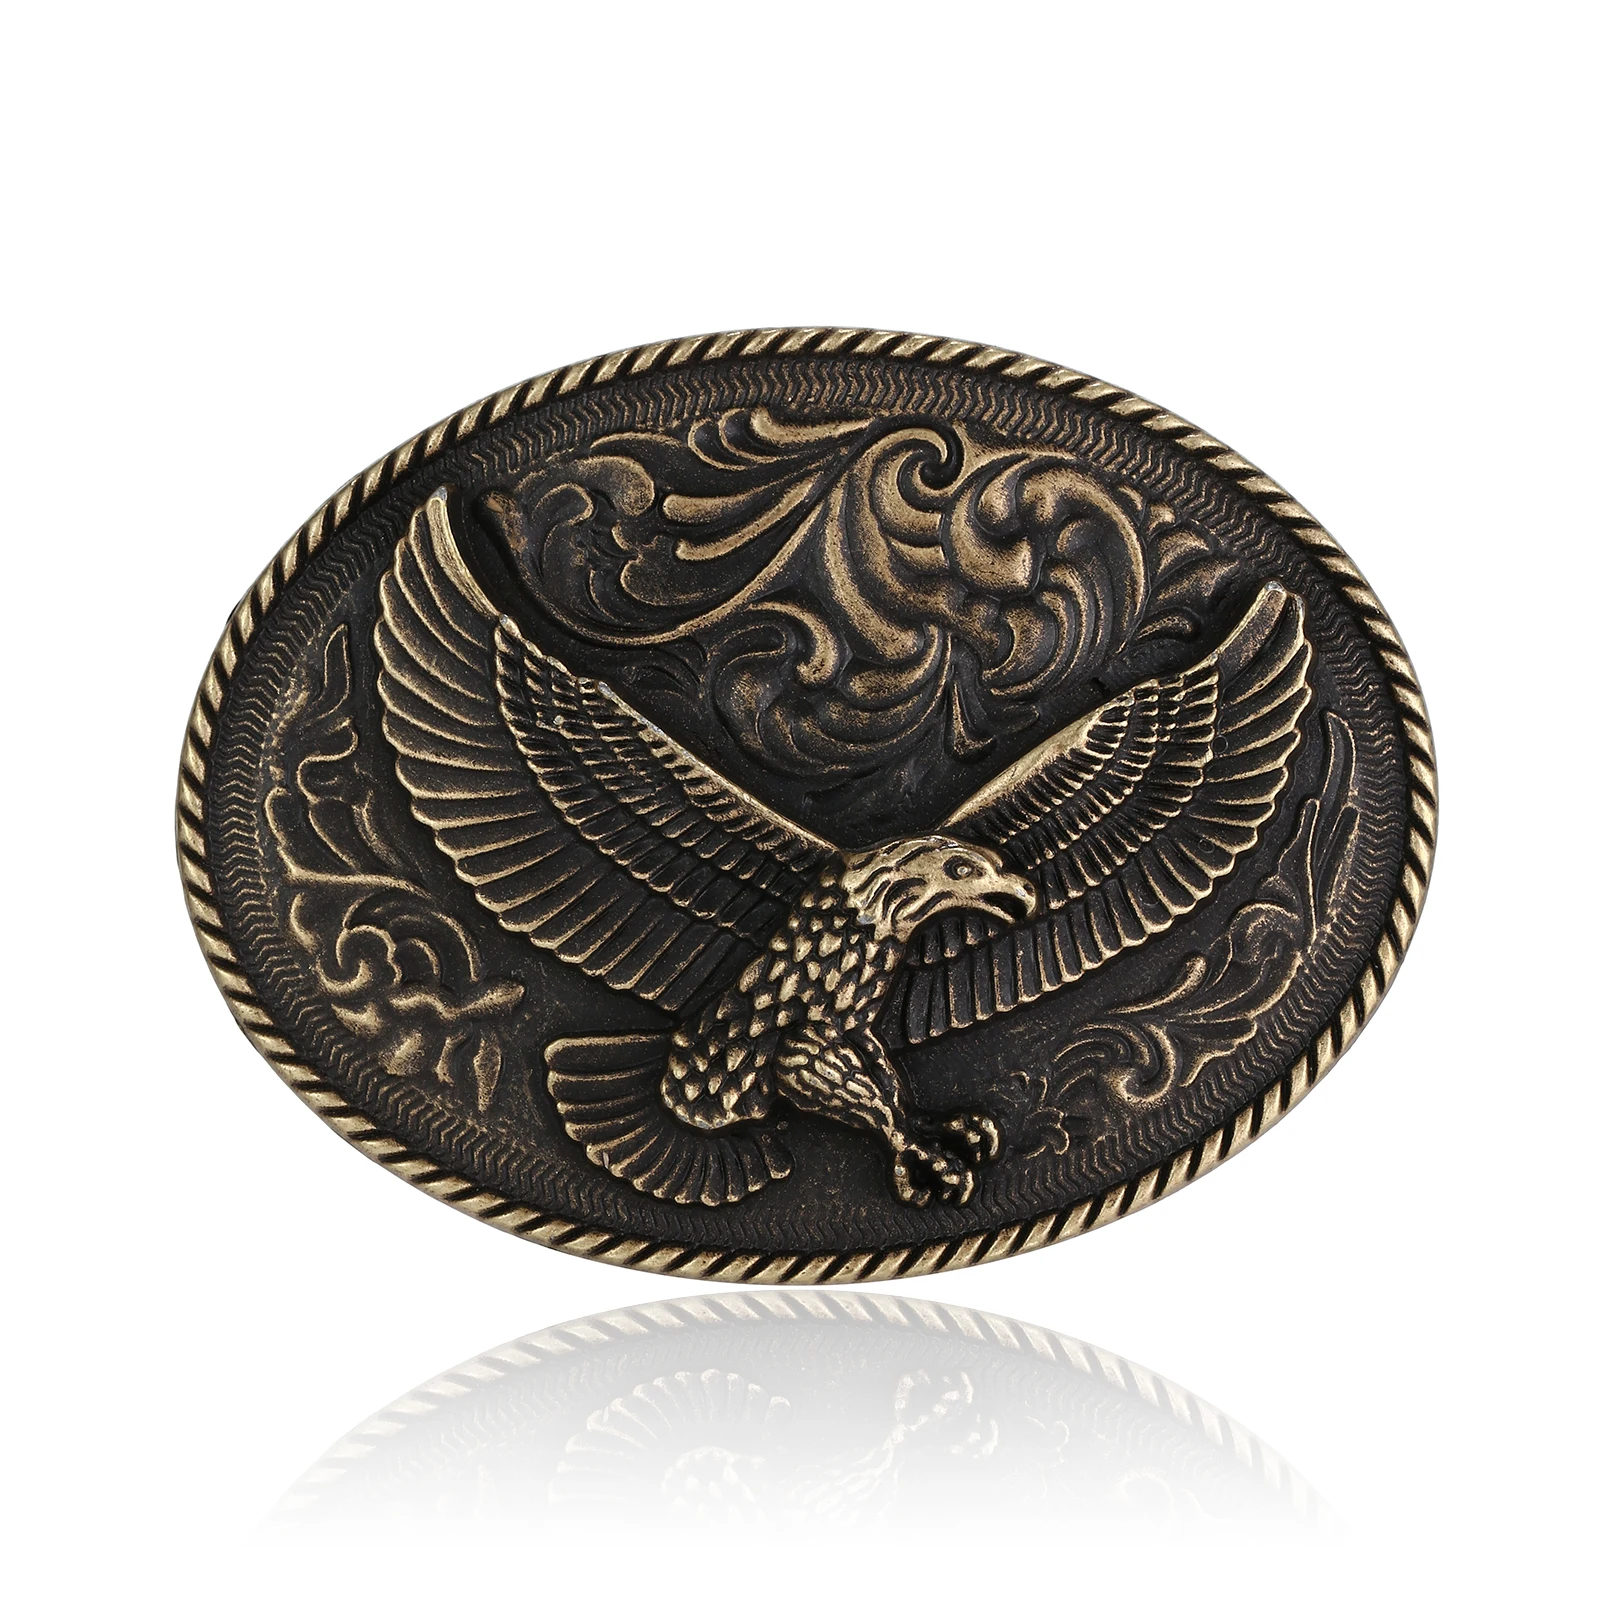 

Western cowboy zinc alloy retro totem wings eagle yearning for freedom attitude buckle men's belt buckle